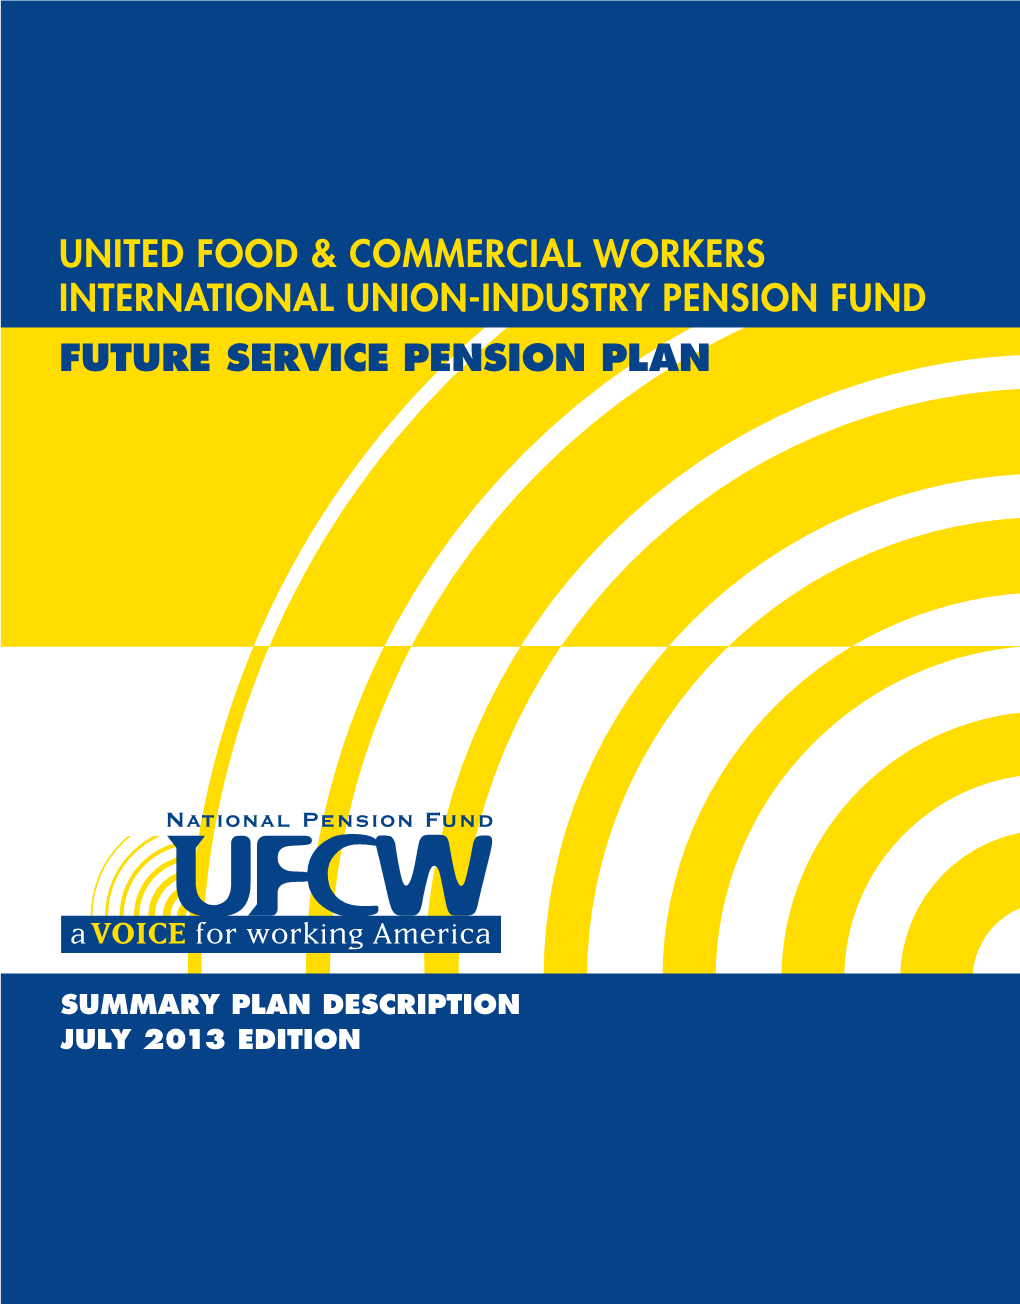 United Food & Commercial Workers International